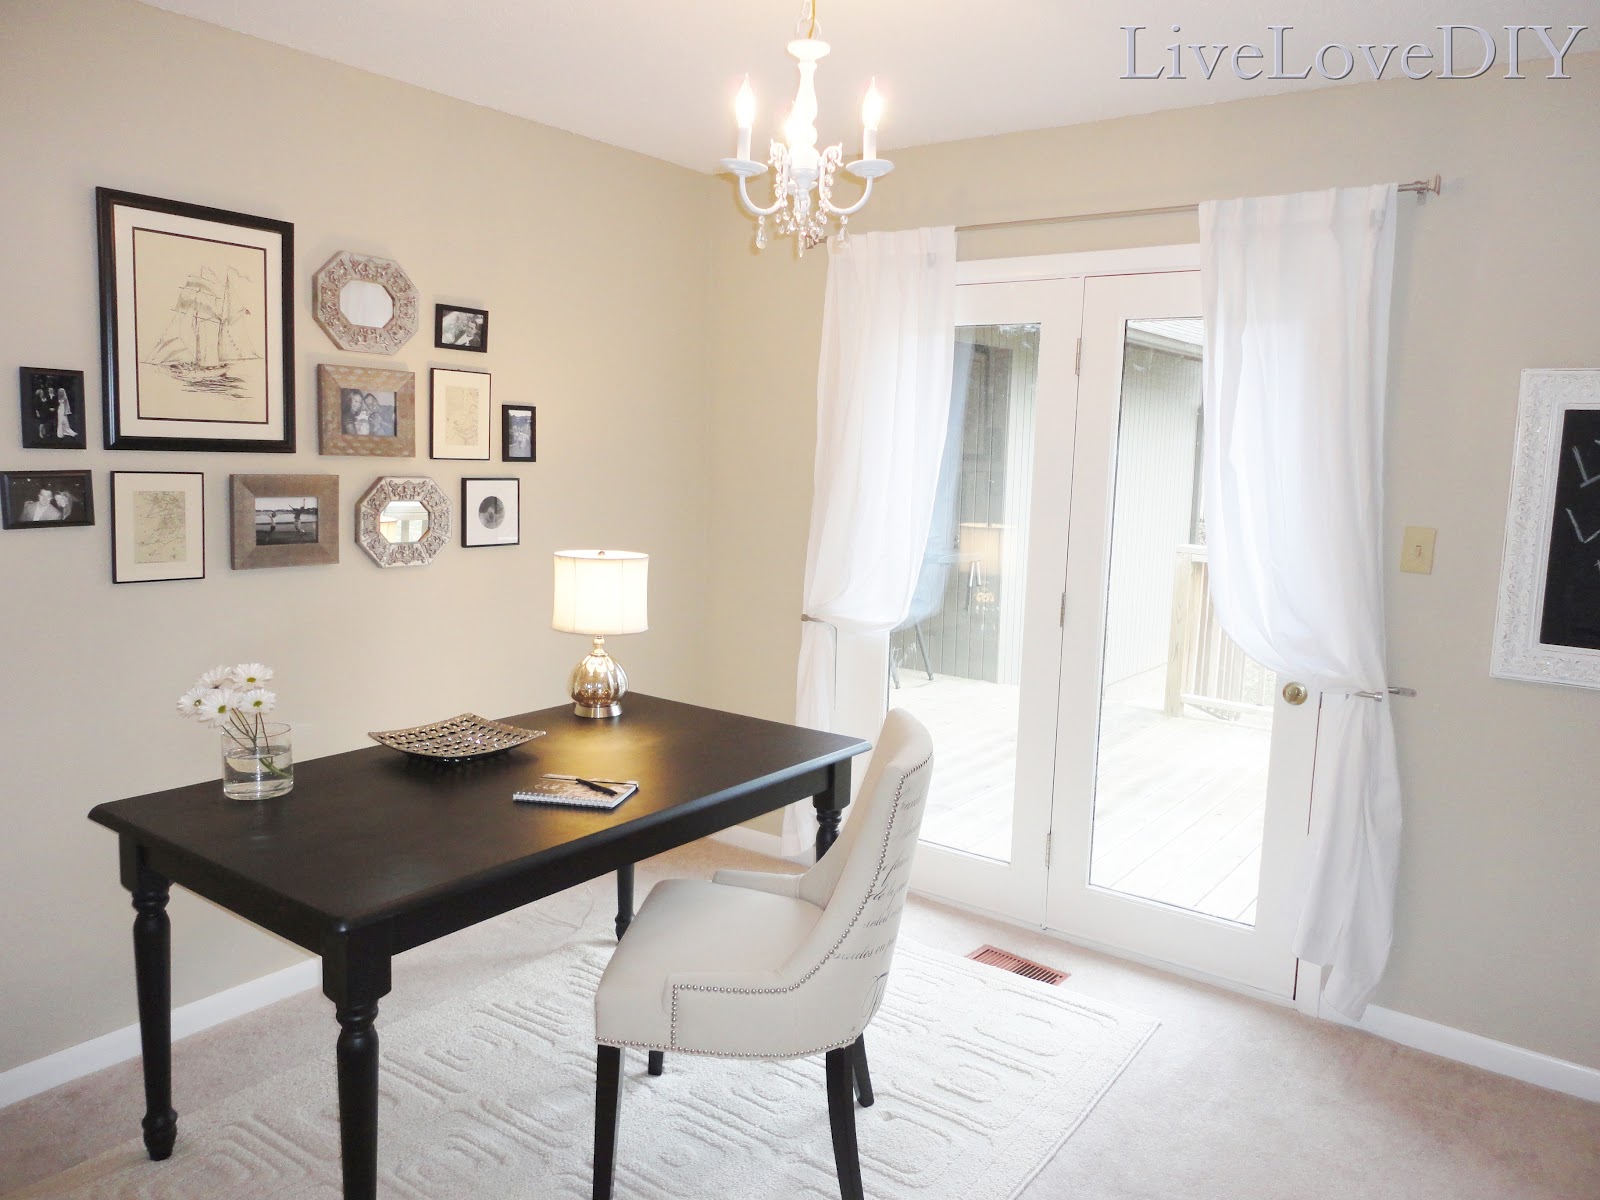 Livelovediy Painting Trim Walls What You Need To Know